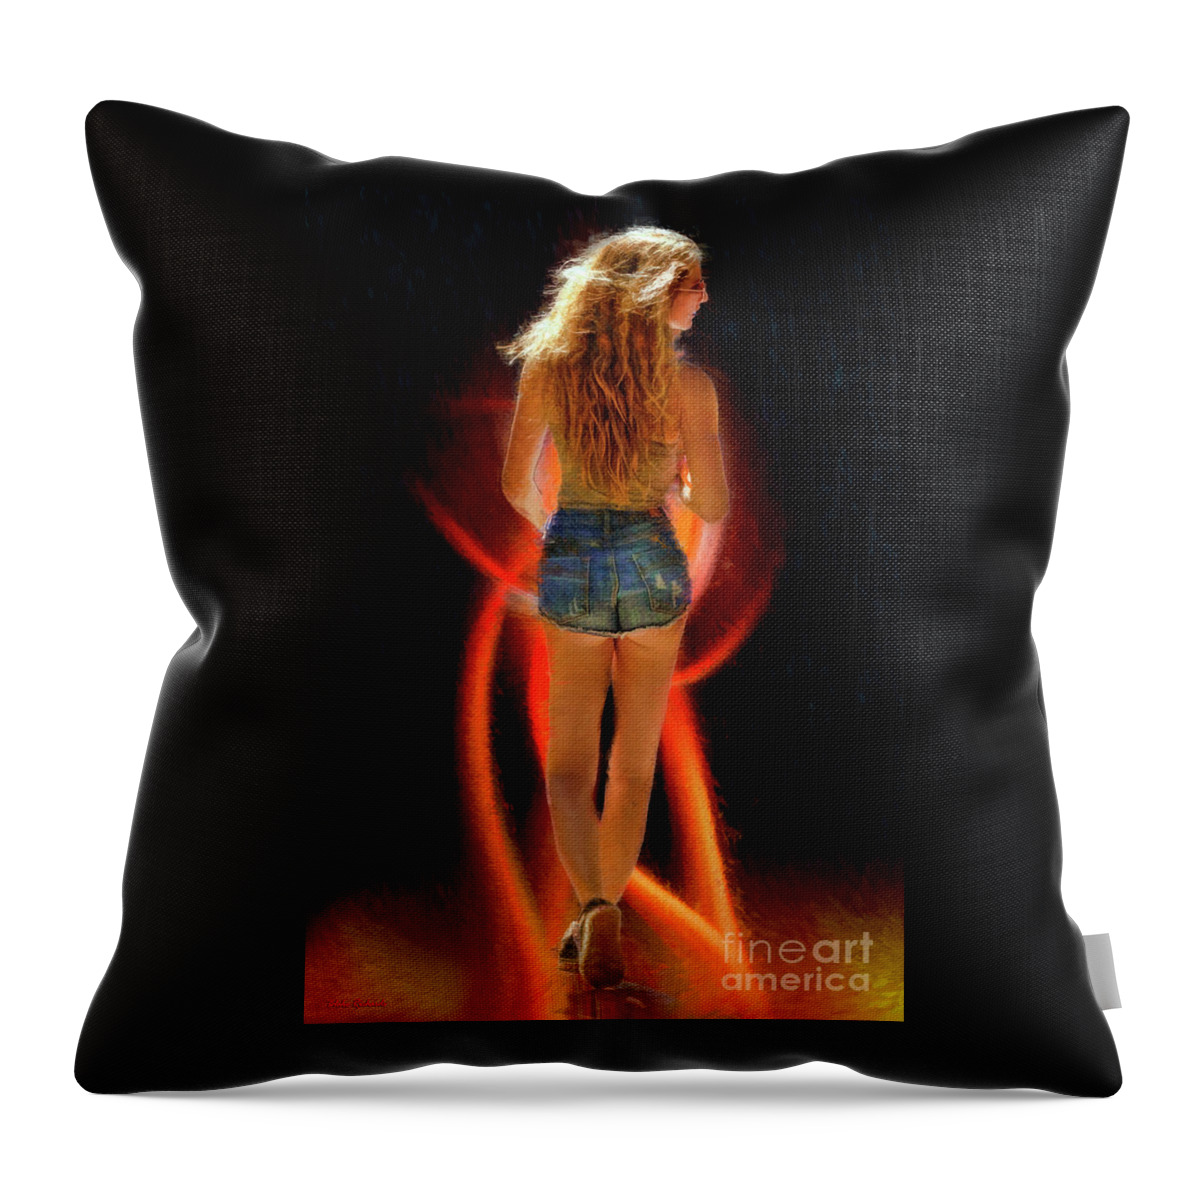 Pretty Girls Throw Pillow featuring the photograph Uninhibited by Blake Richards